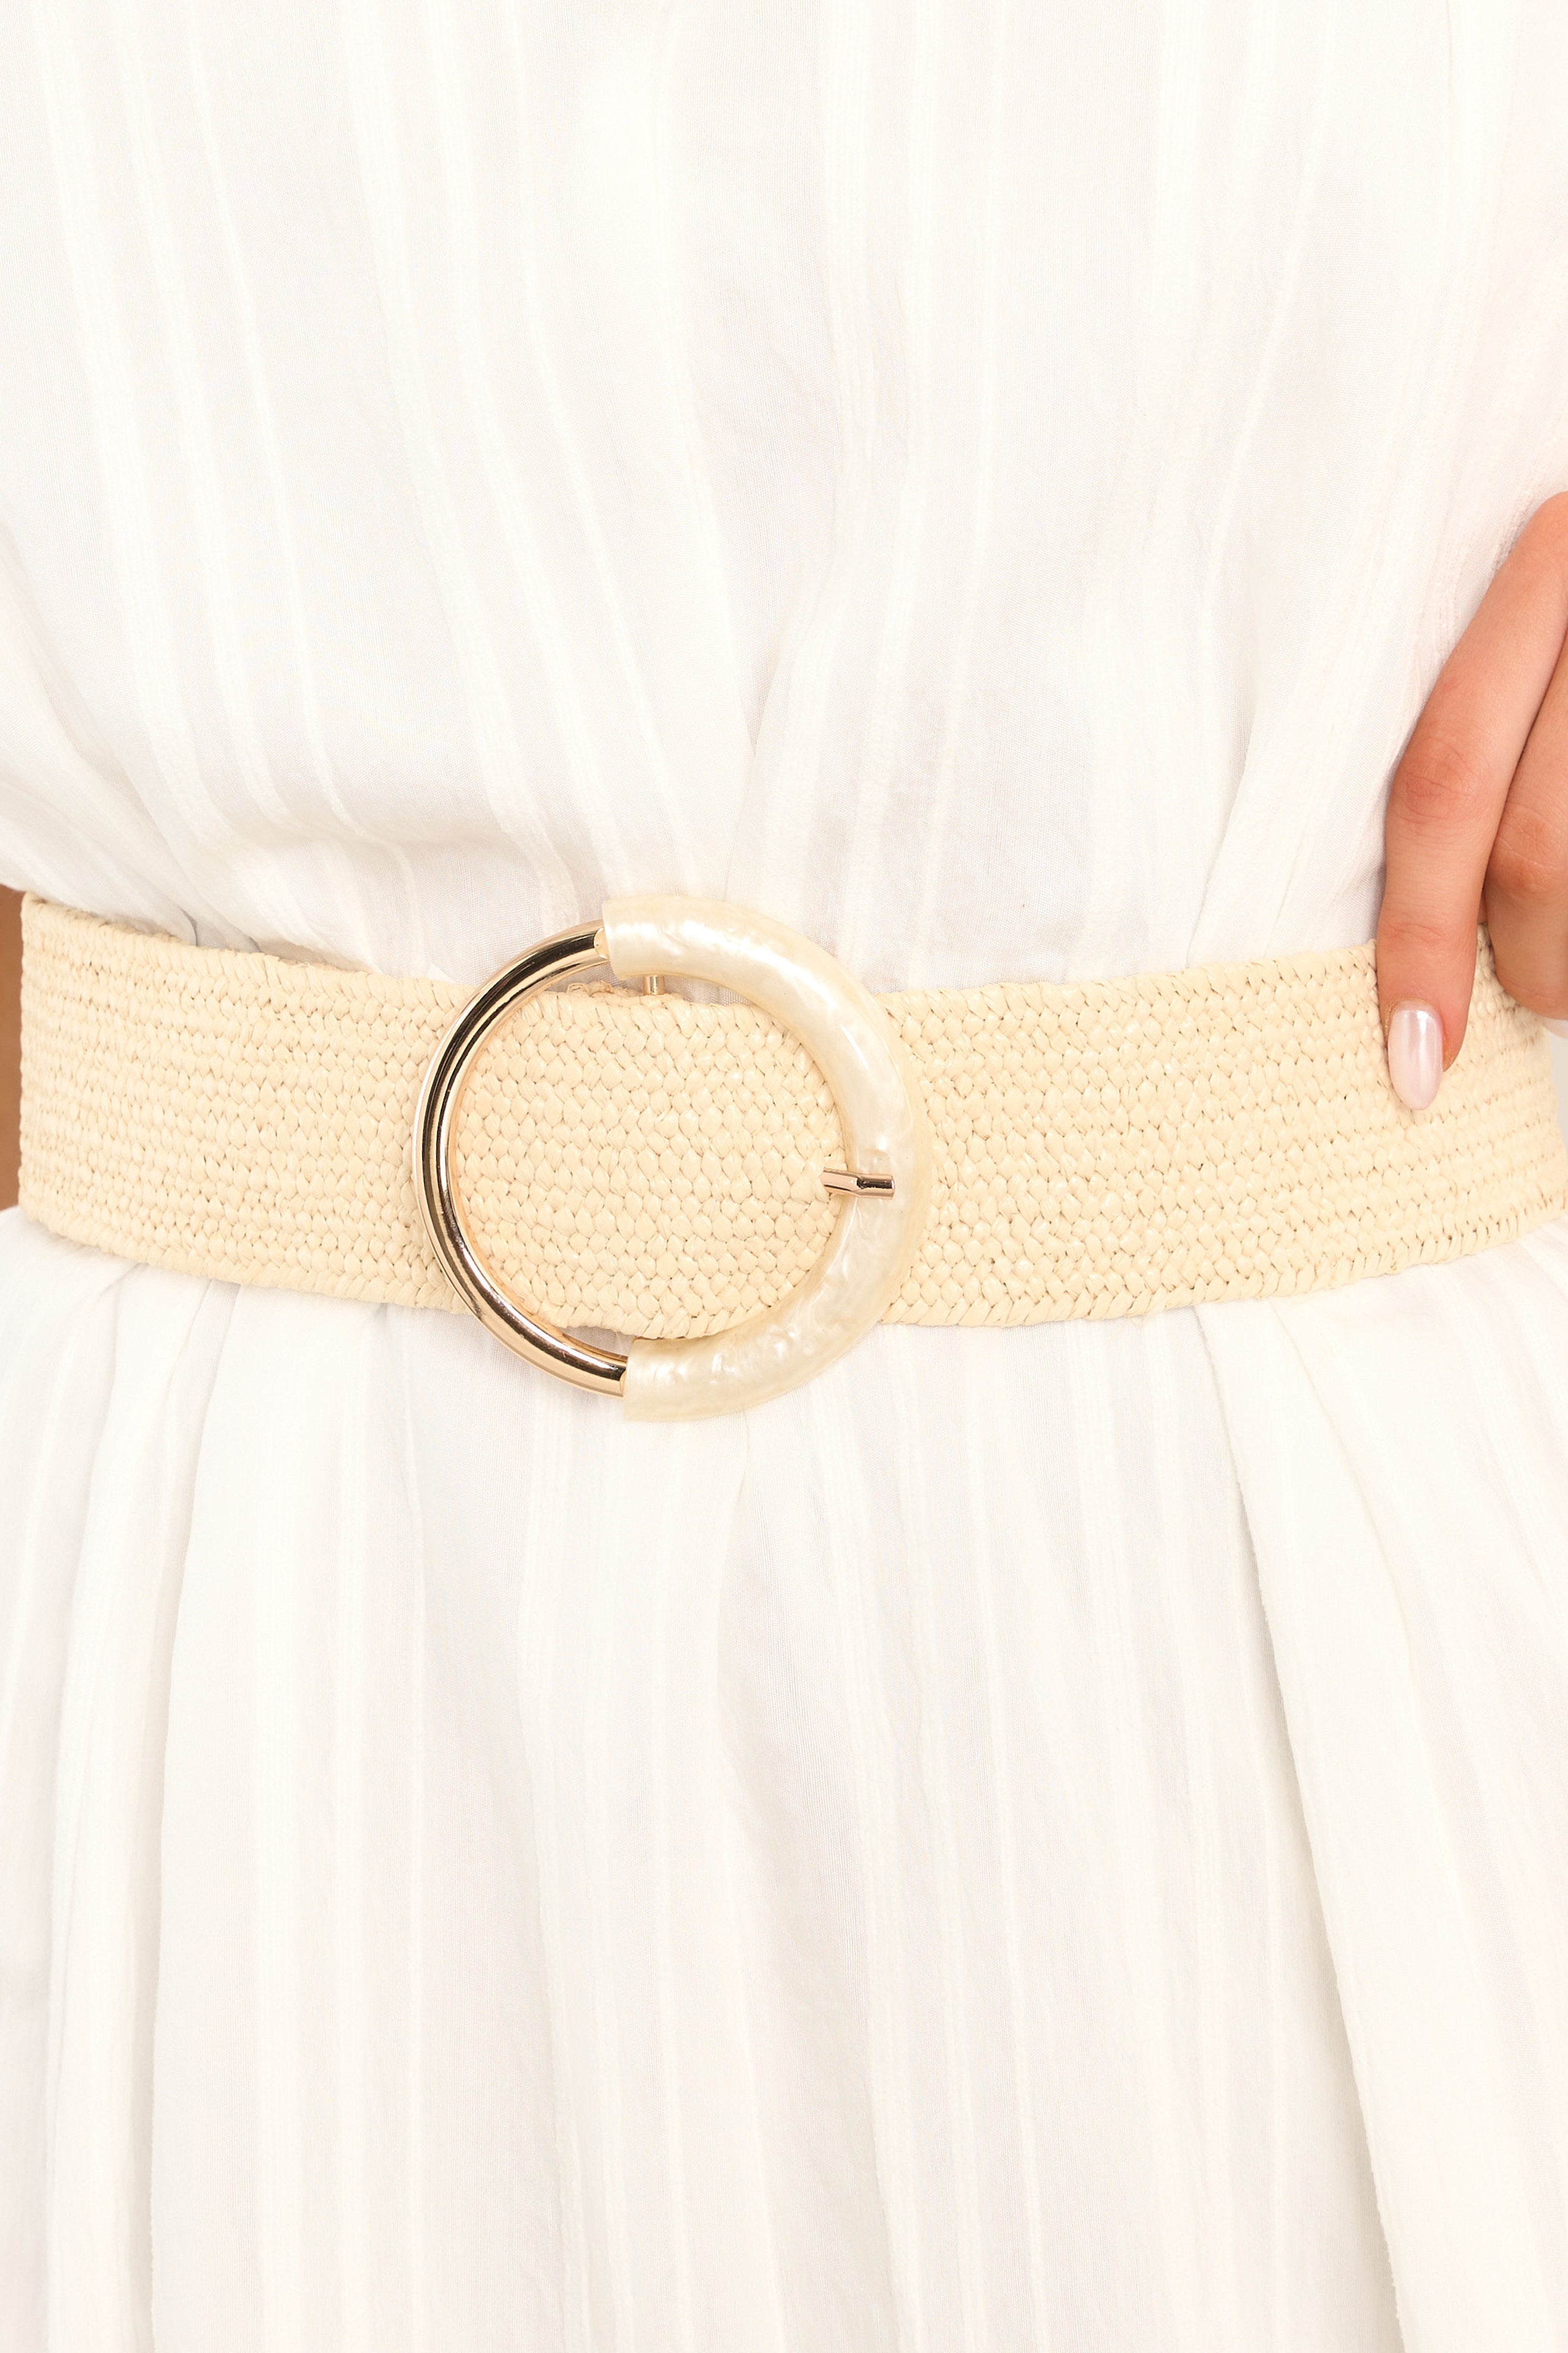 This ivory belt features an elastic band, gold hardware, and a circular buckle with an acrylic accent. 